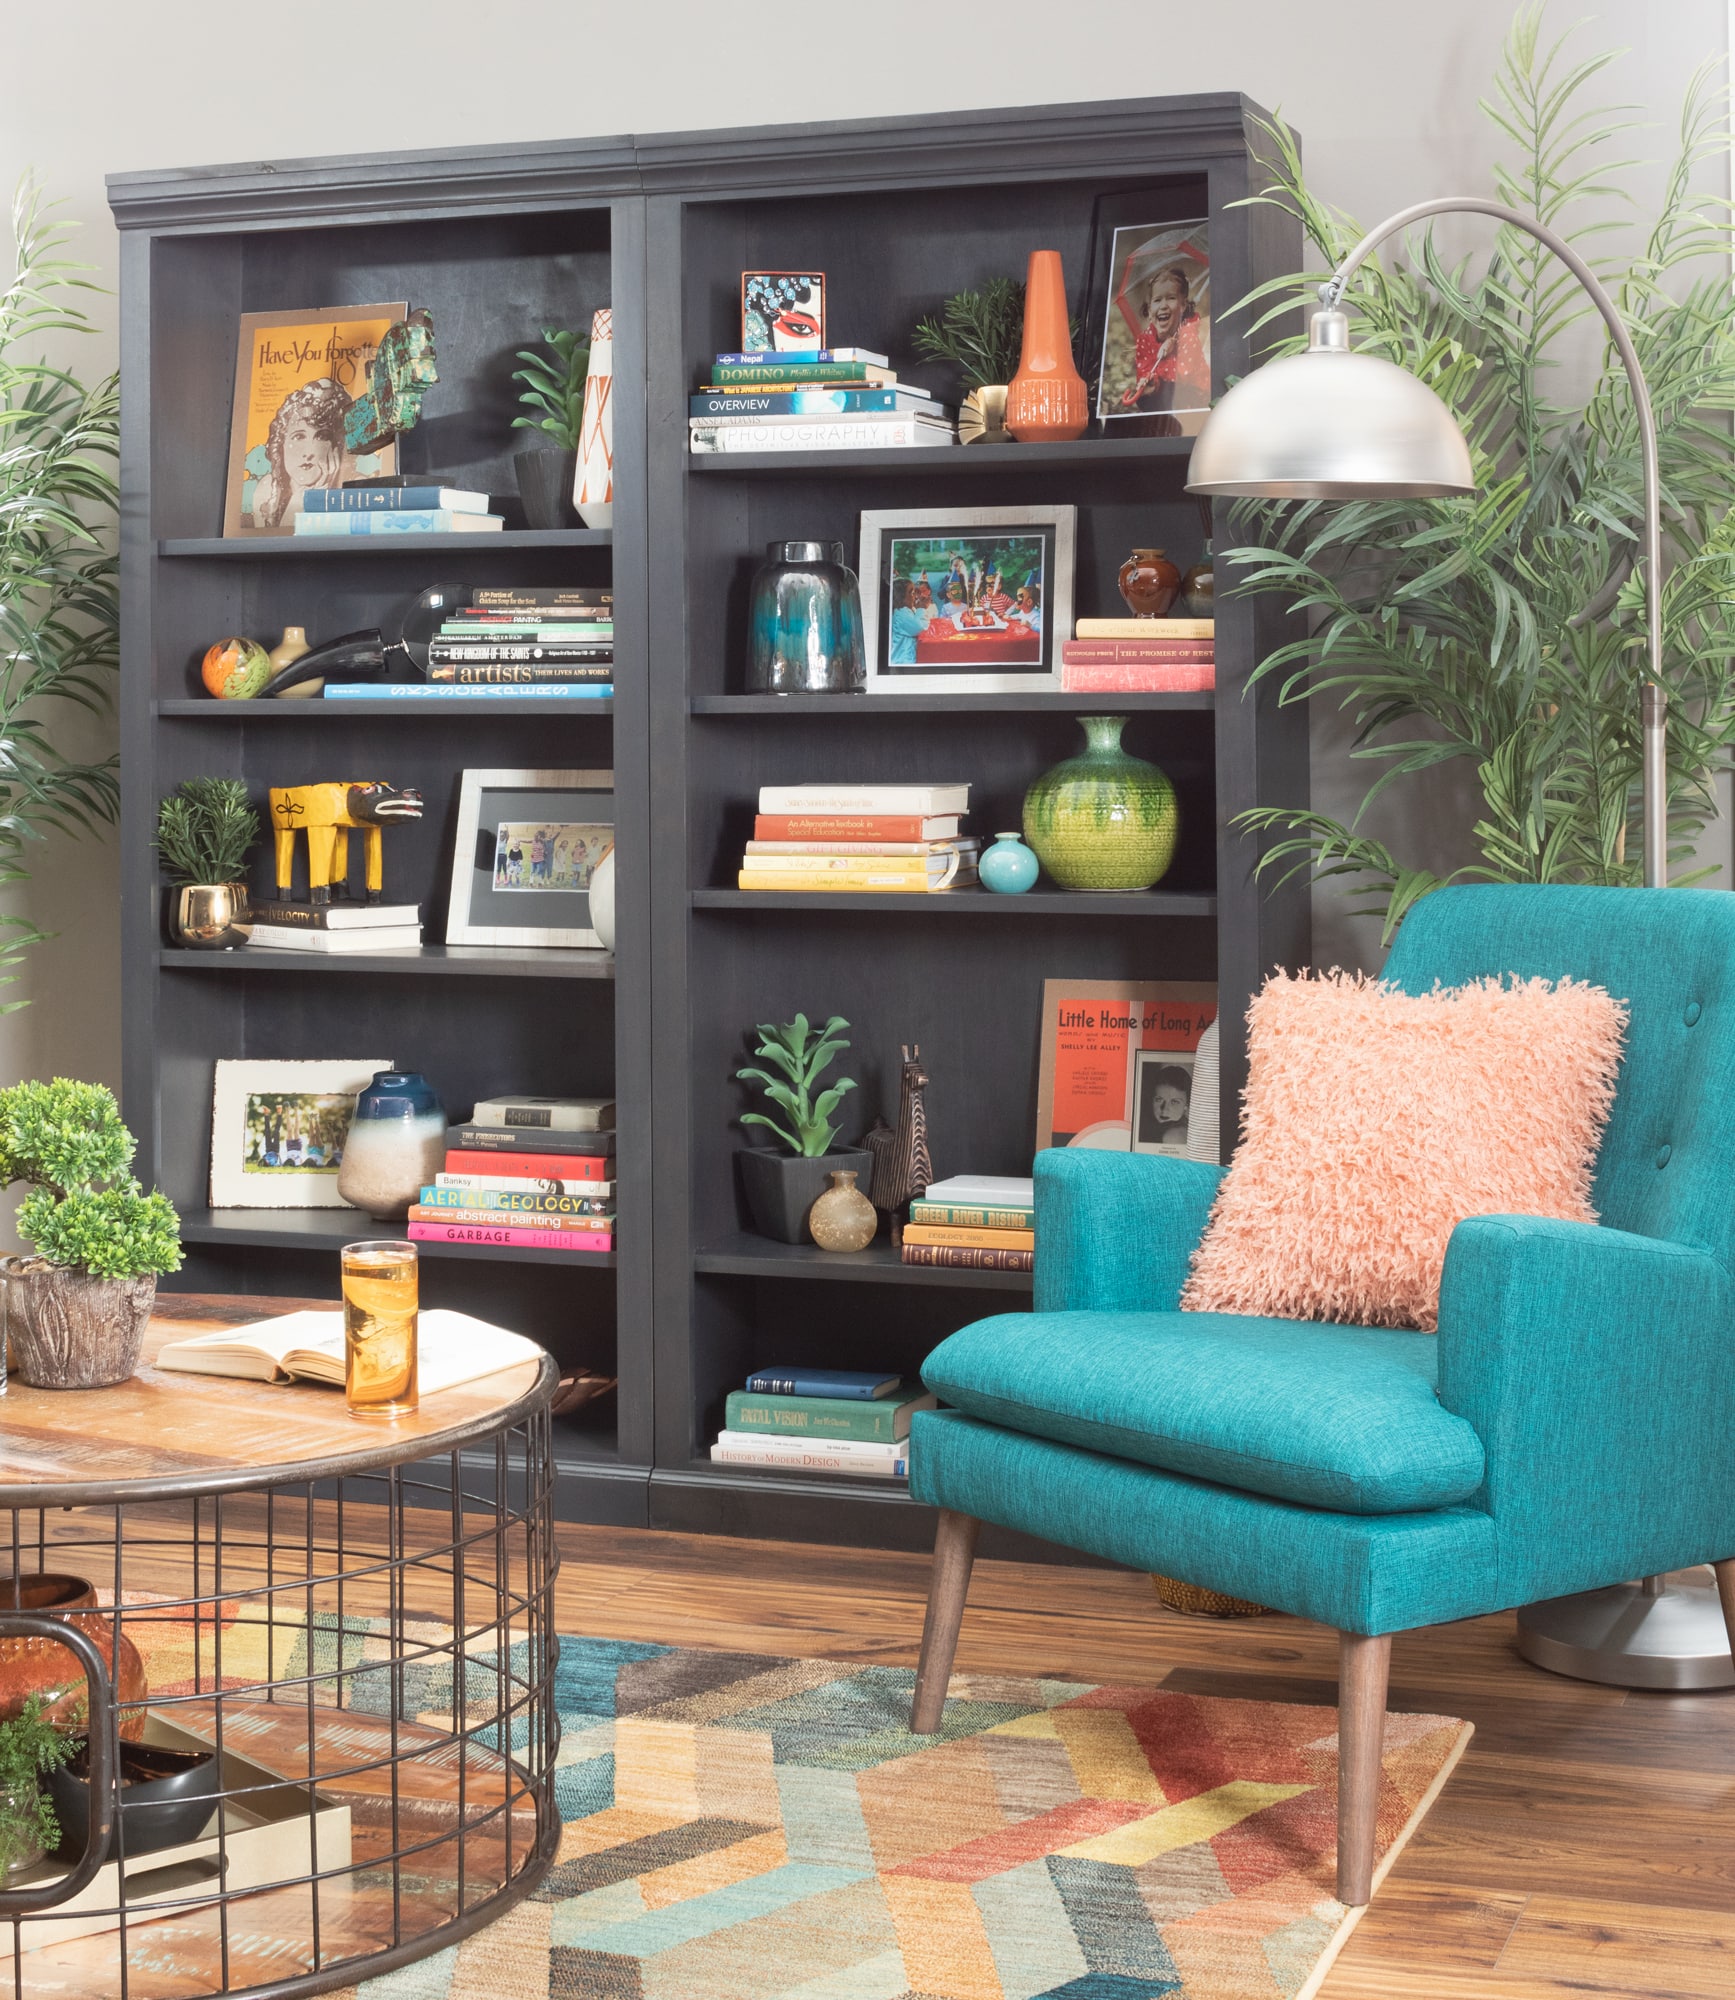 Eclectic bookcase